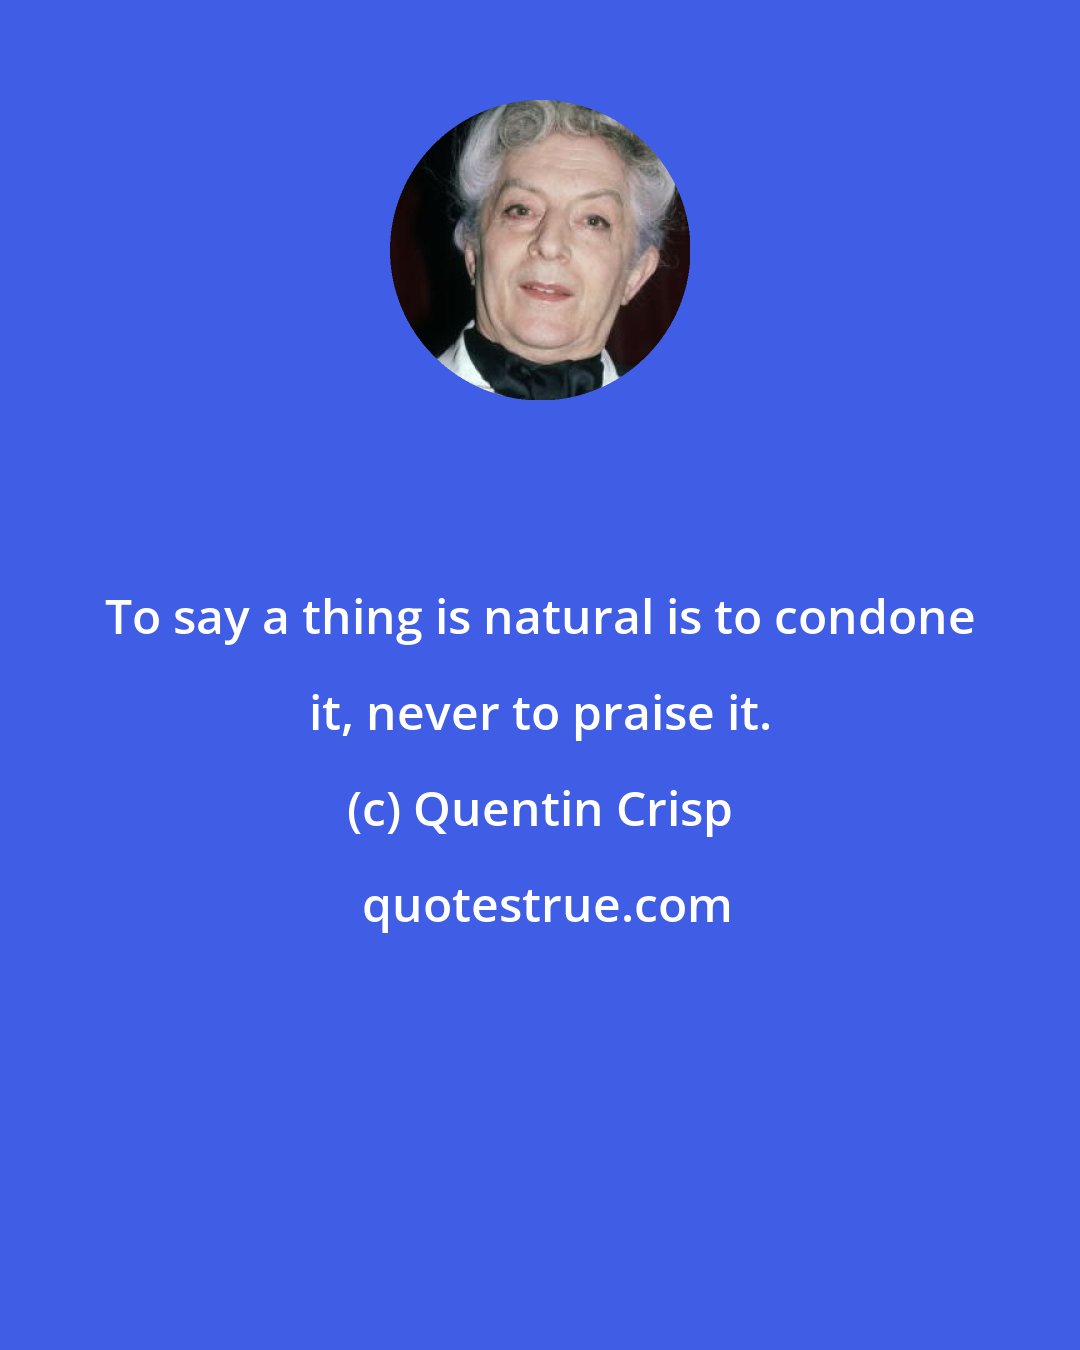 Quentin Crisp: To say a thing is natural is to condone it, never to praise it.